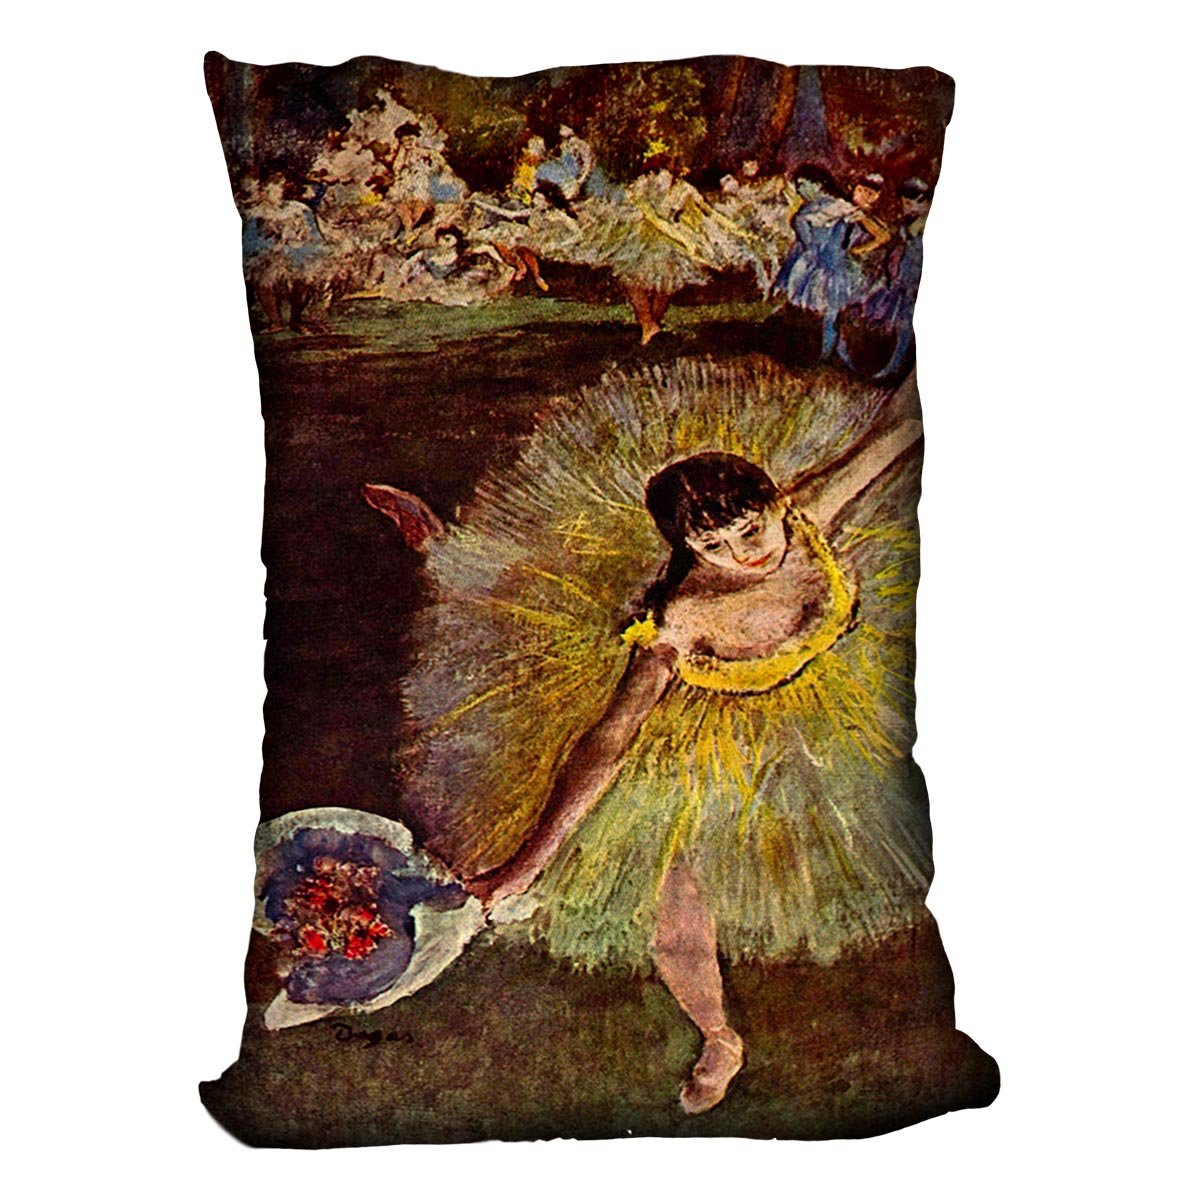 End of the arabesque by Degas Cushion